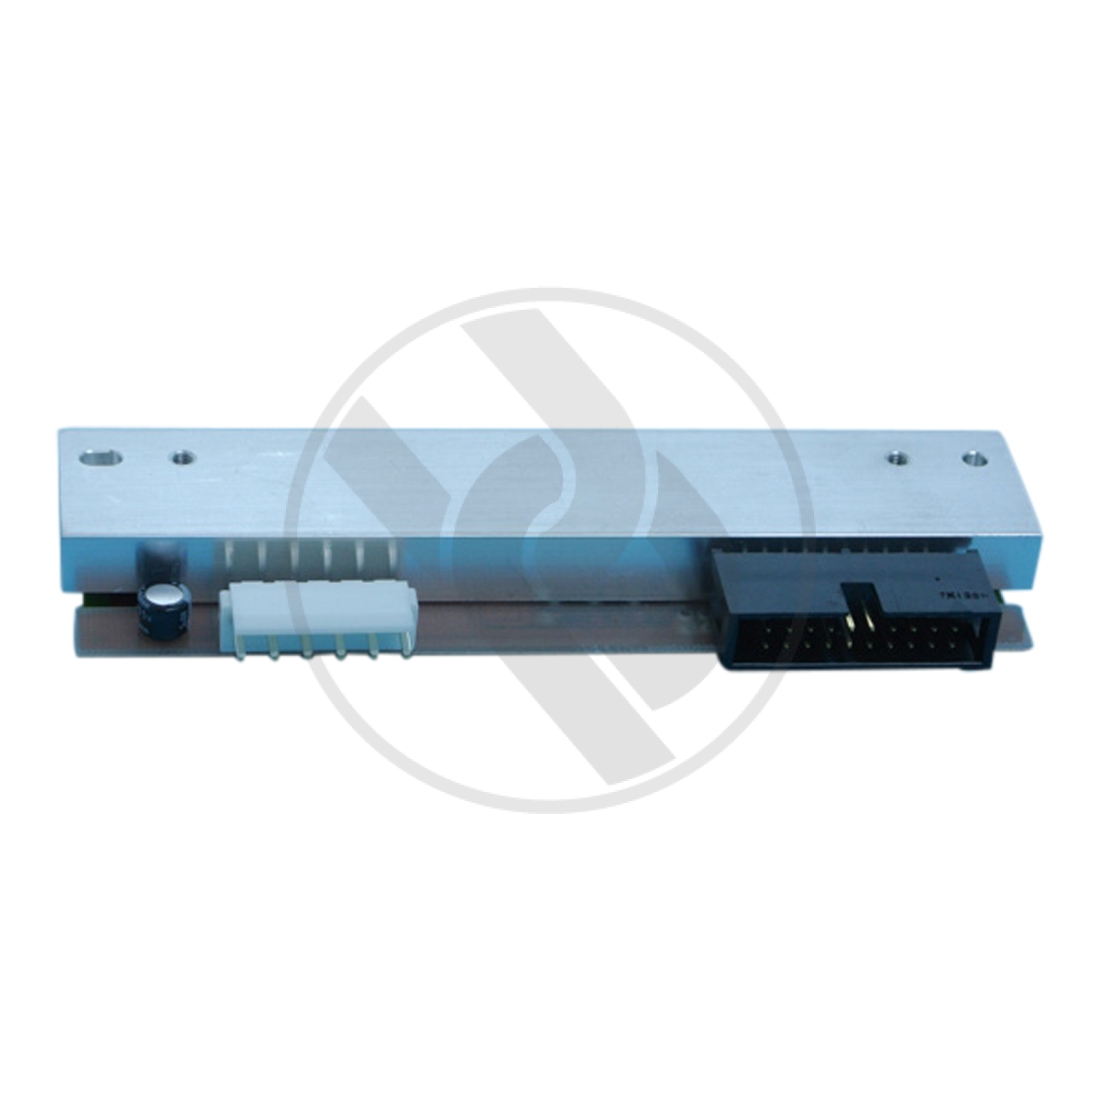 Thermal printhead, 98969, for Avery-Novexx 98969